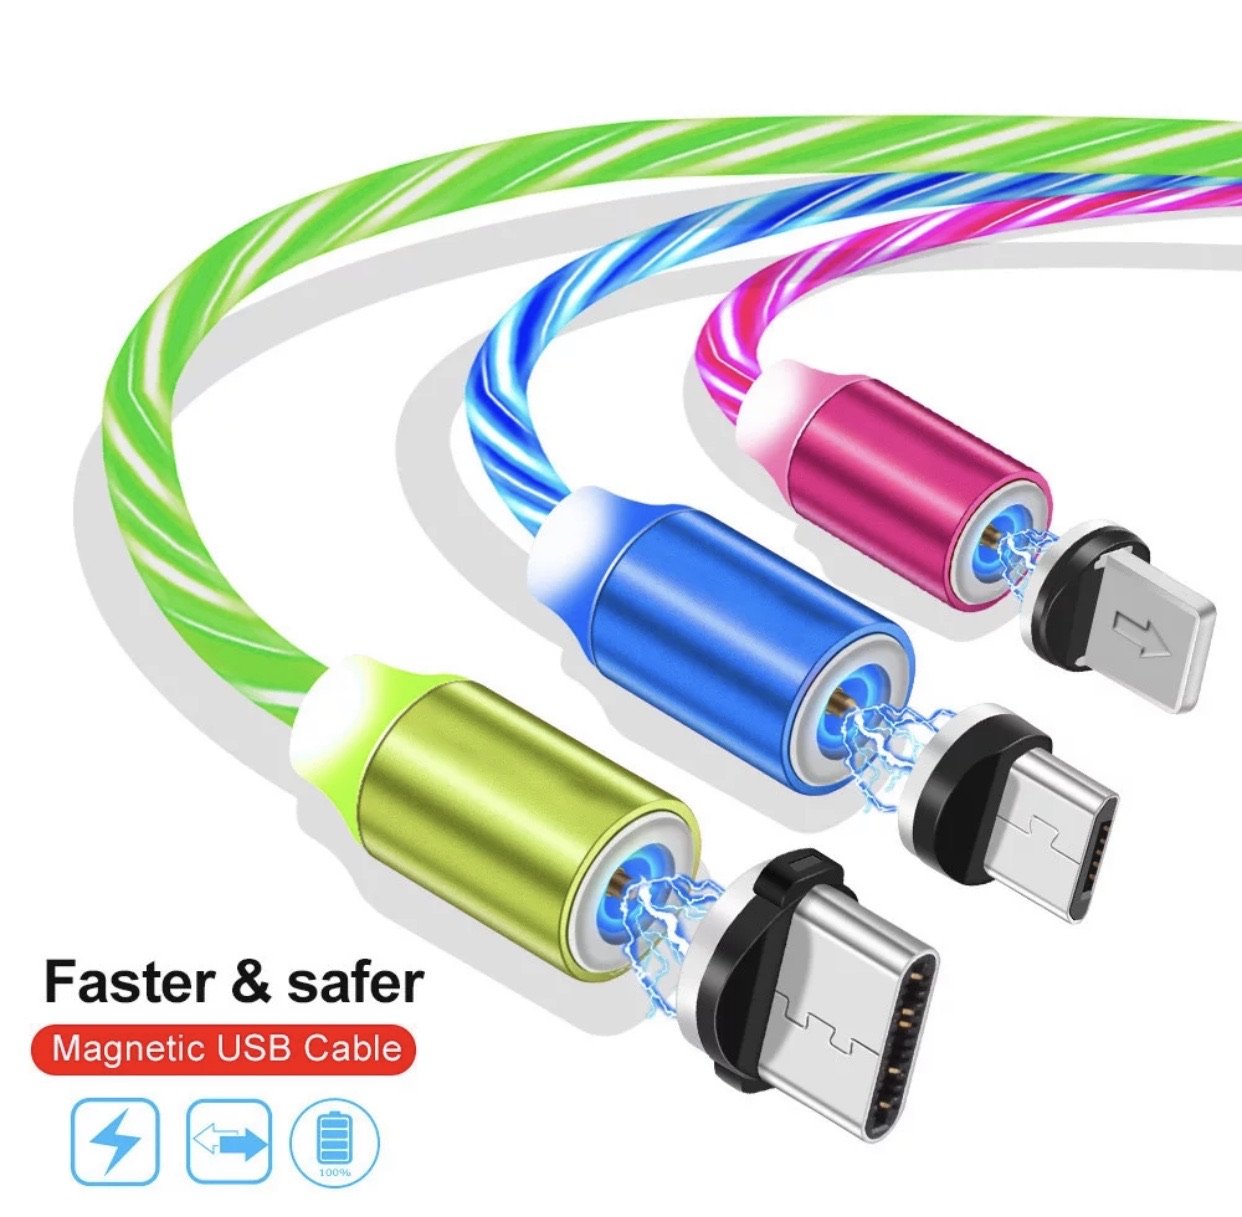 Pulsating 3 in 1 LED charging Cable